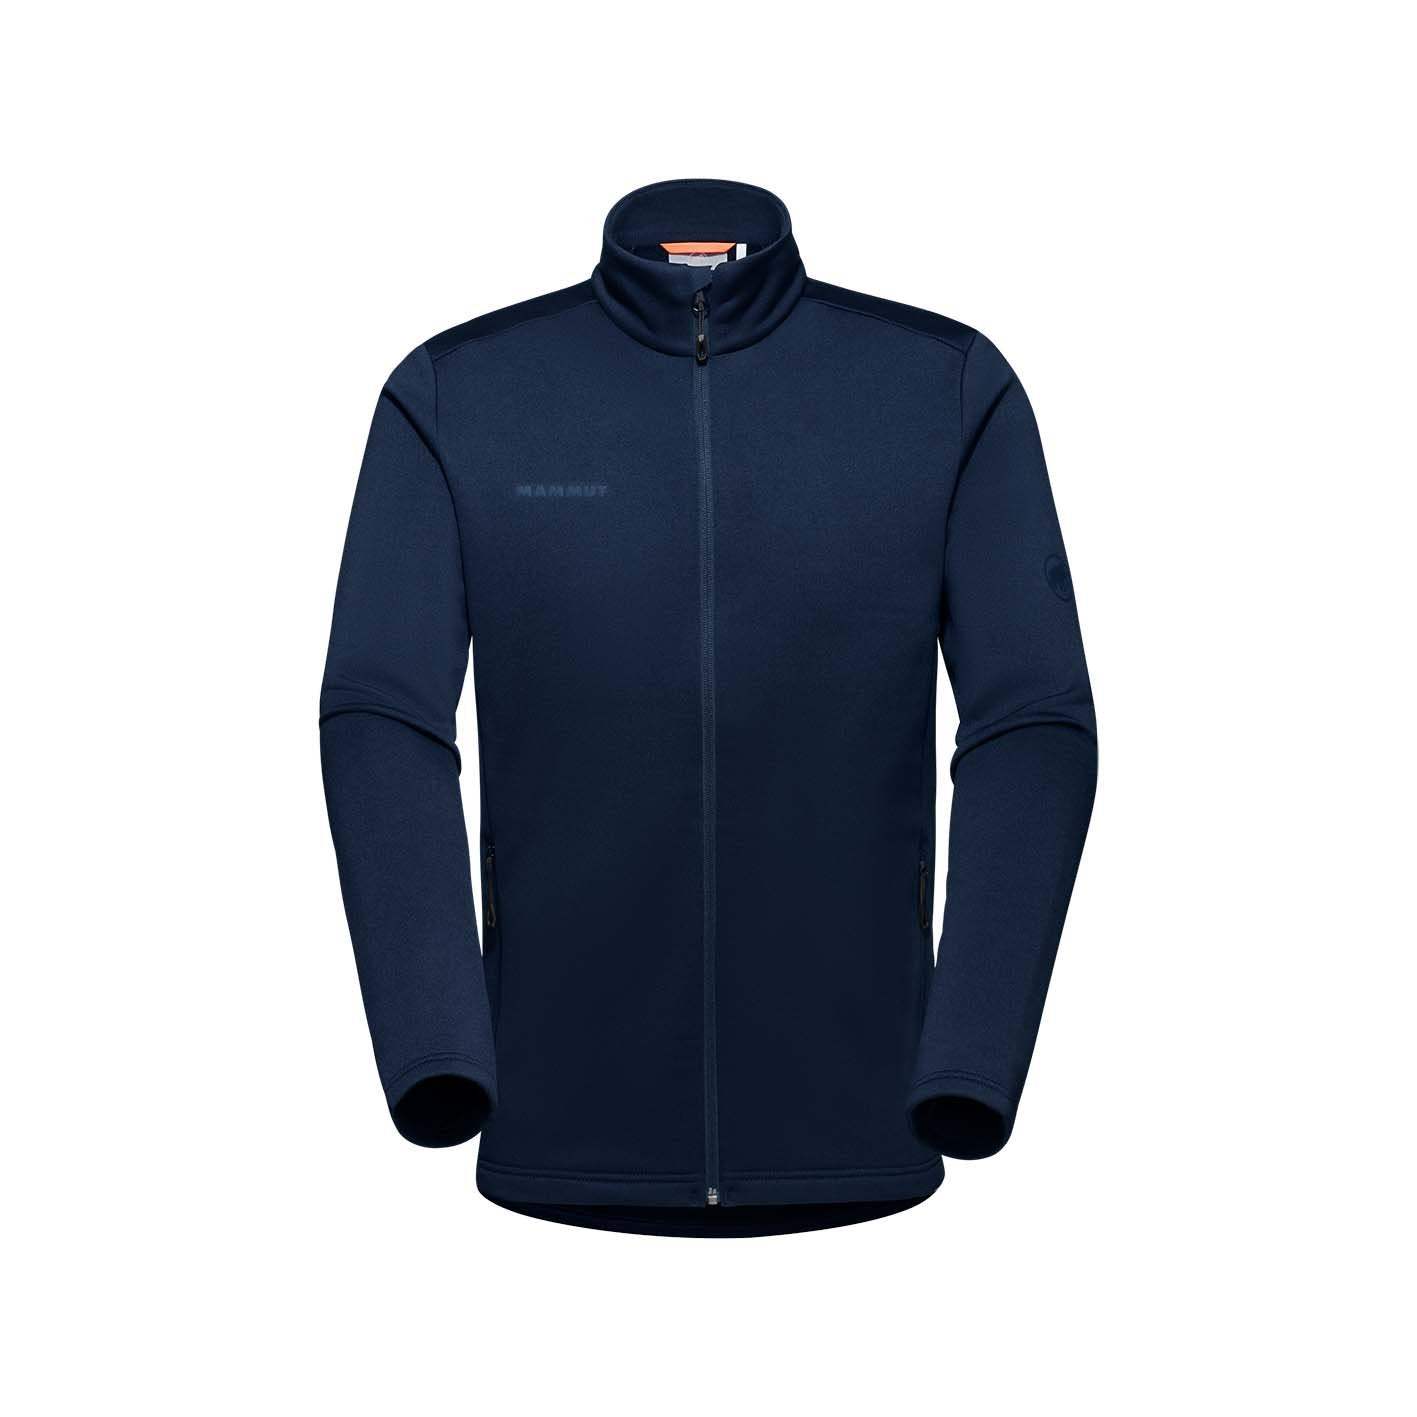 Men's Corporate Mid-Layer Jacket by Mammut